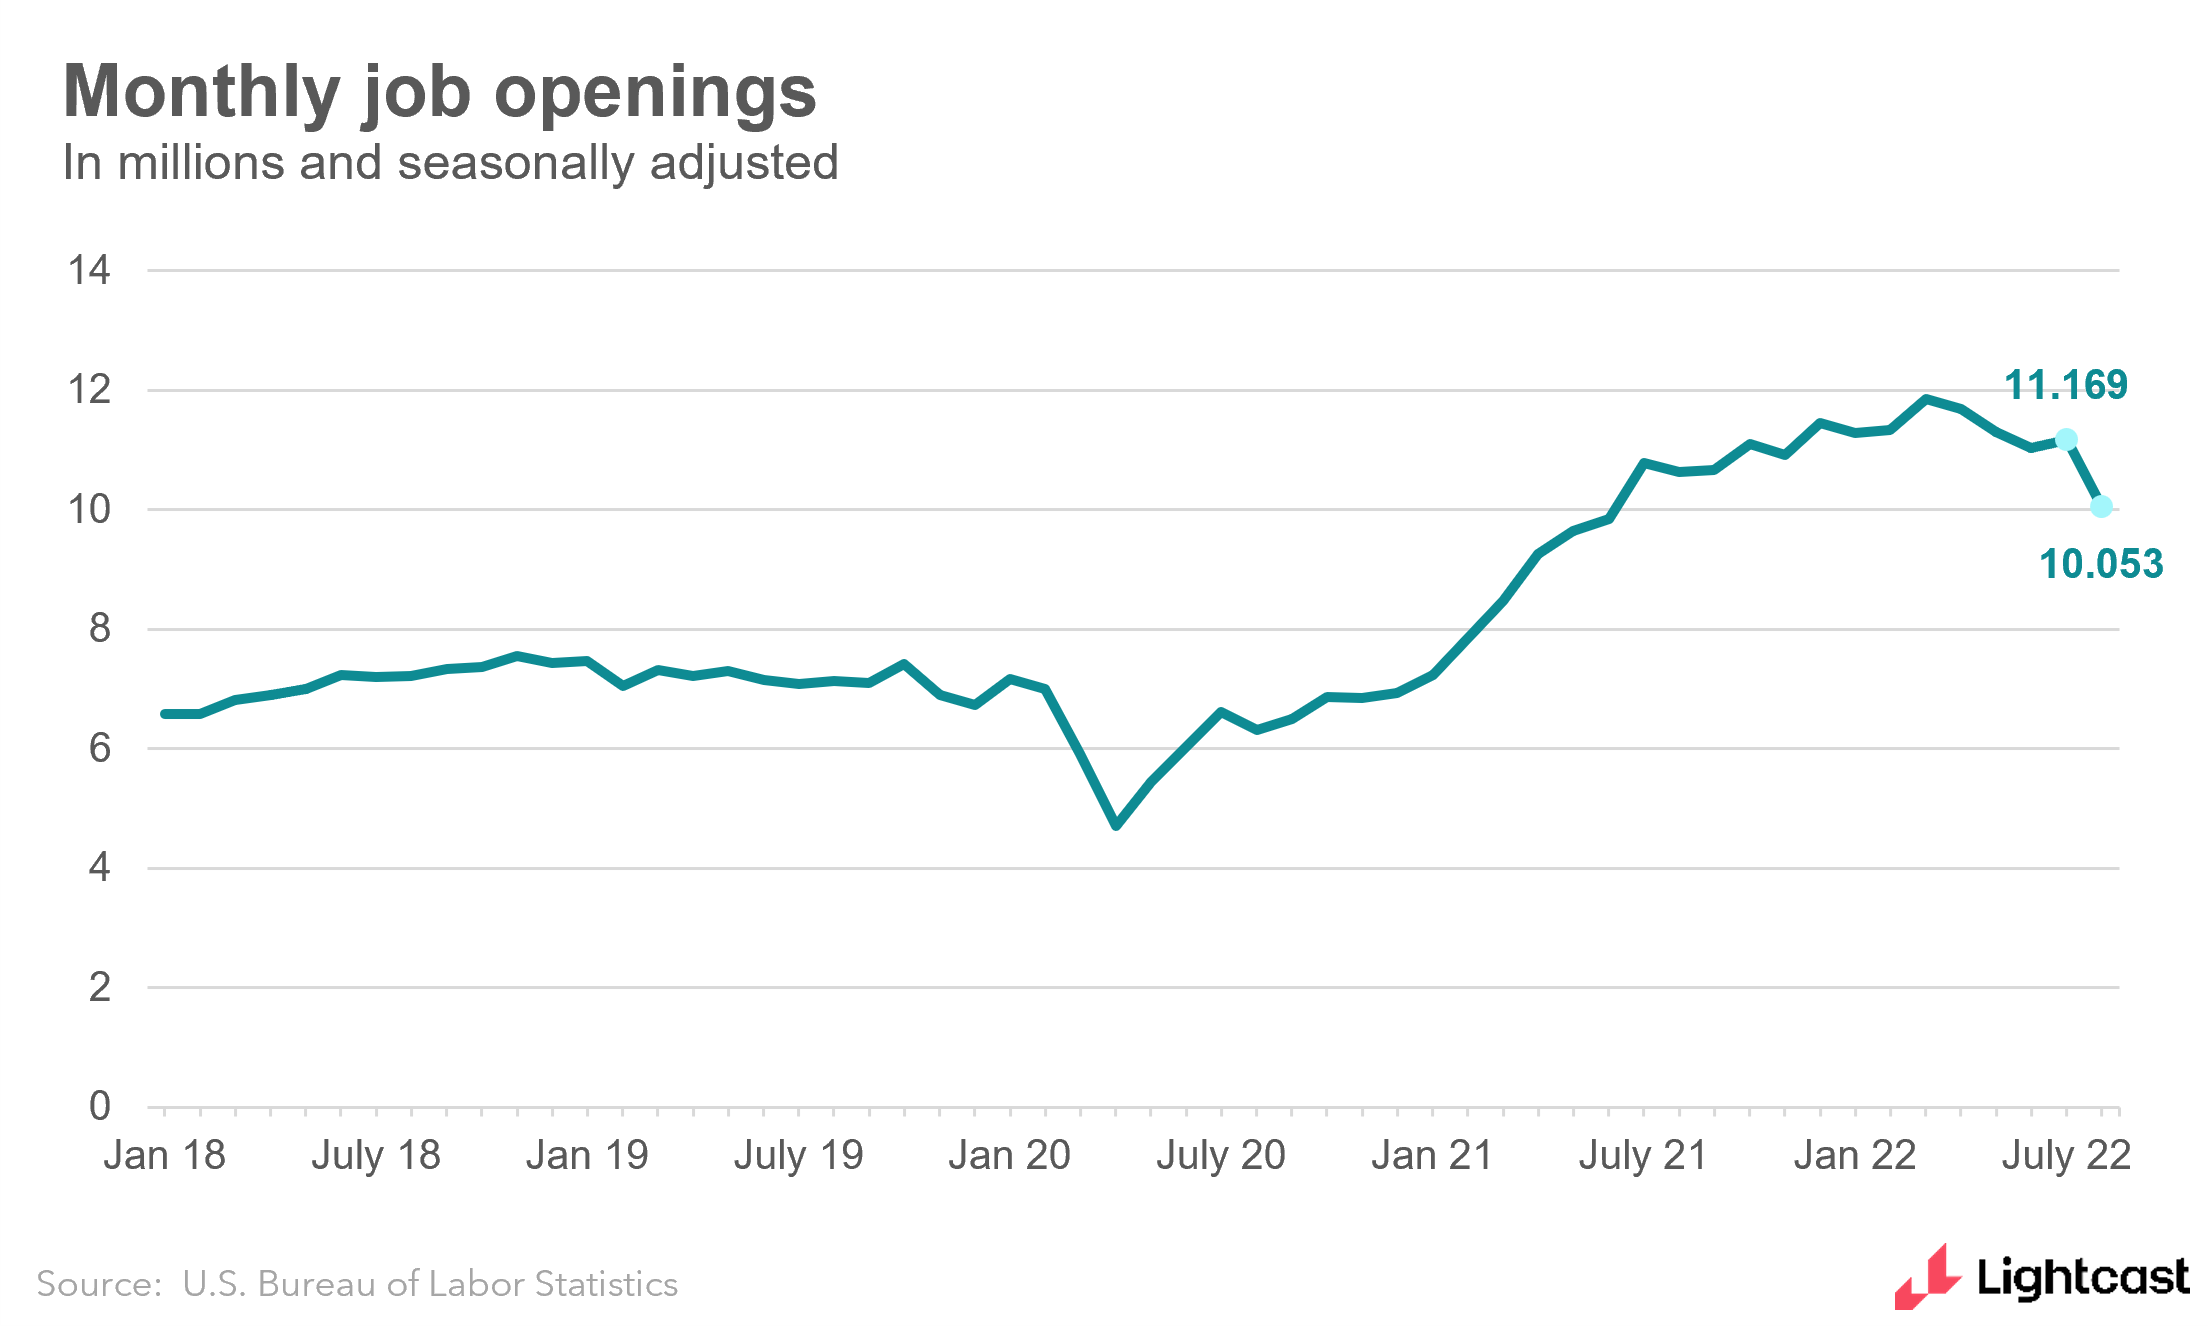 Line chart showing monthly job openings